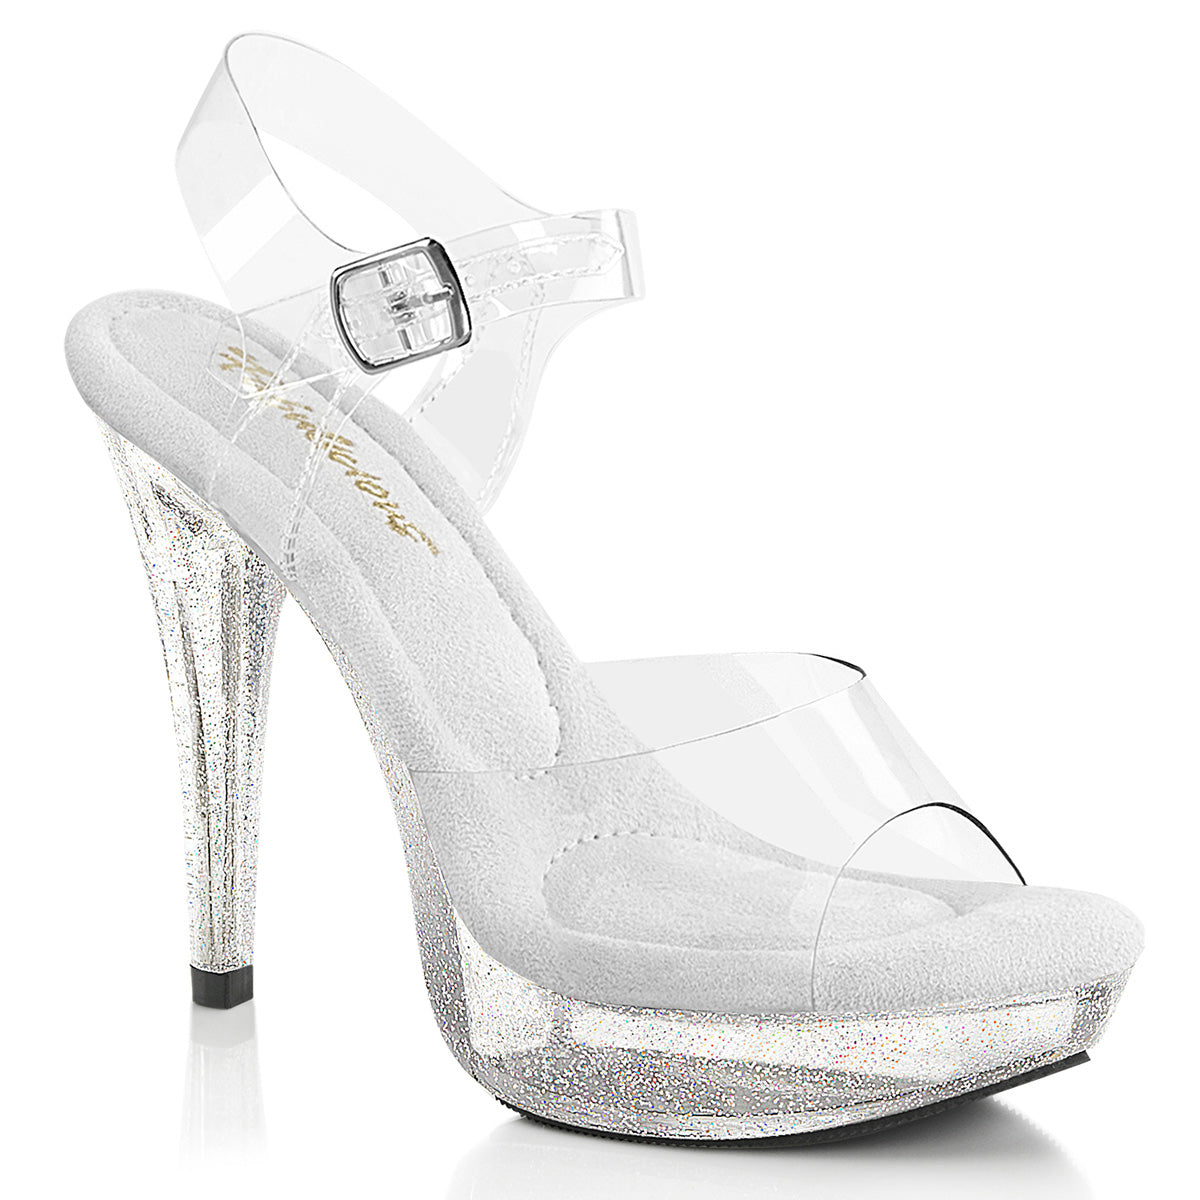 COCKTAIL-508MG Exotic Dancing Fabulicious Shoes Clr/Clr